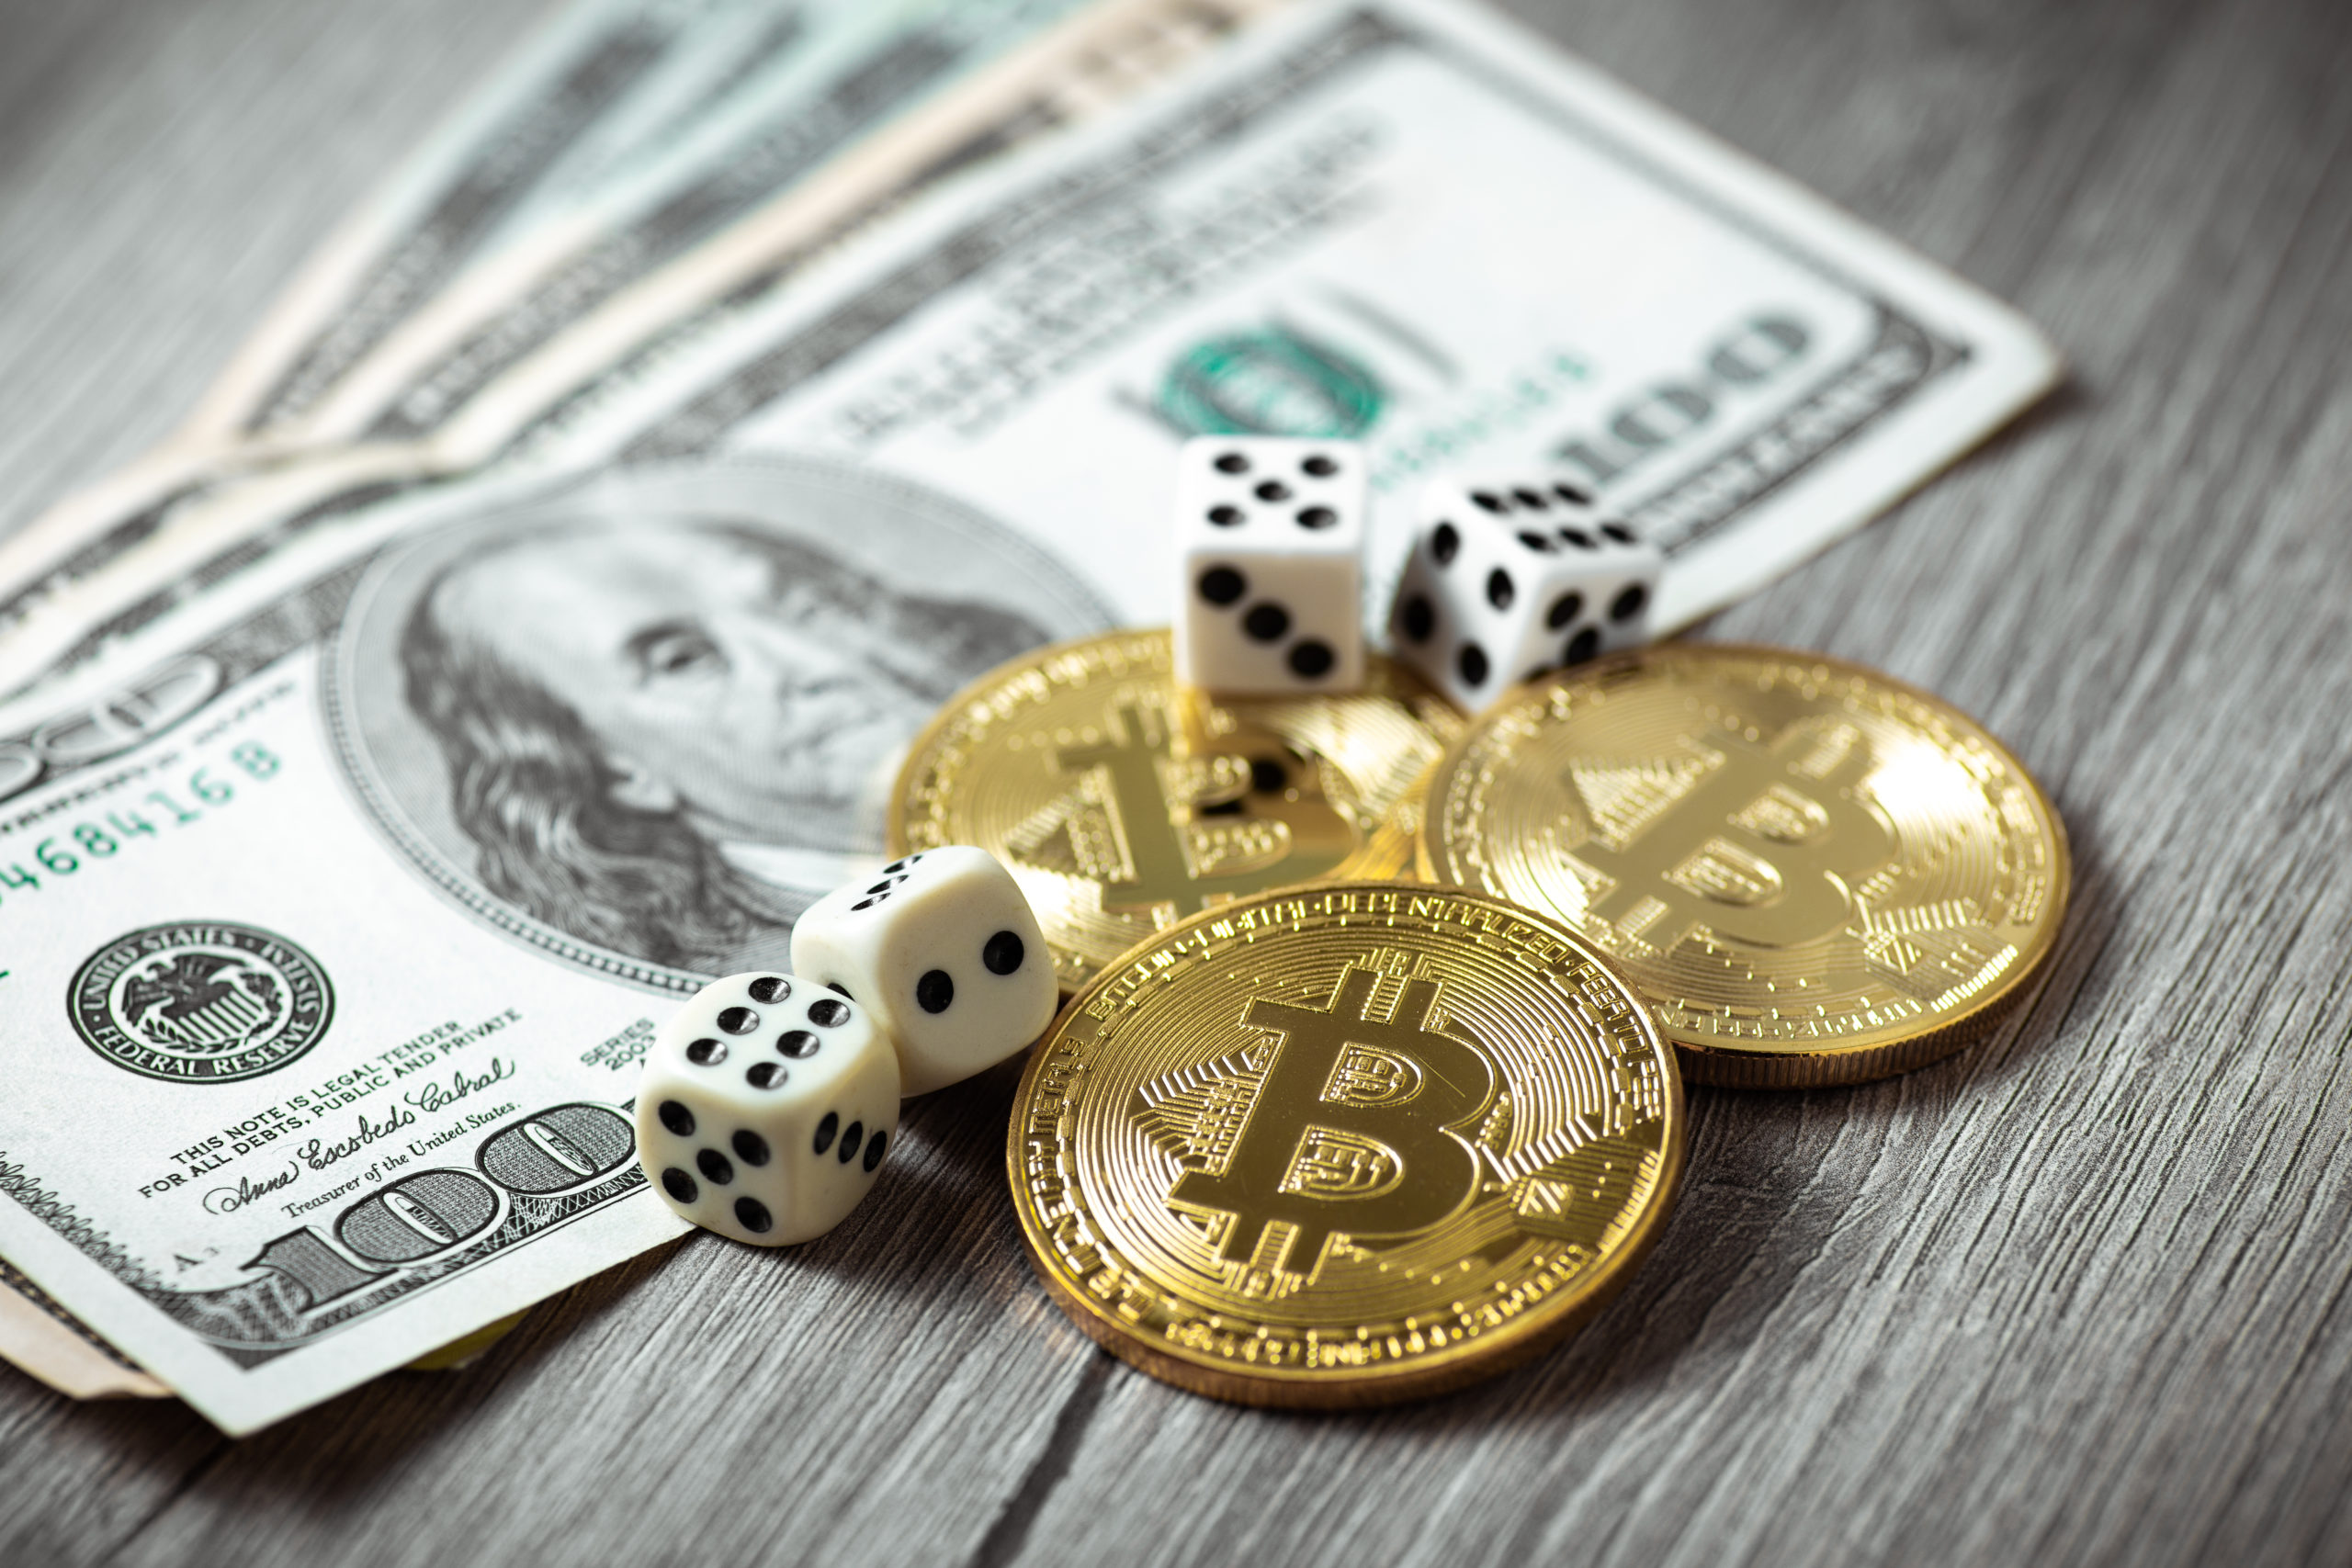 btc gambling For Sale – How Much Is Yours Worth?